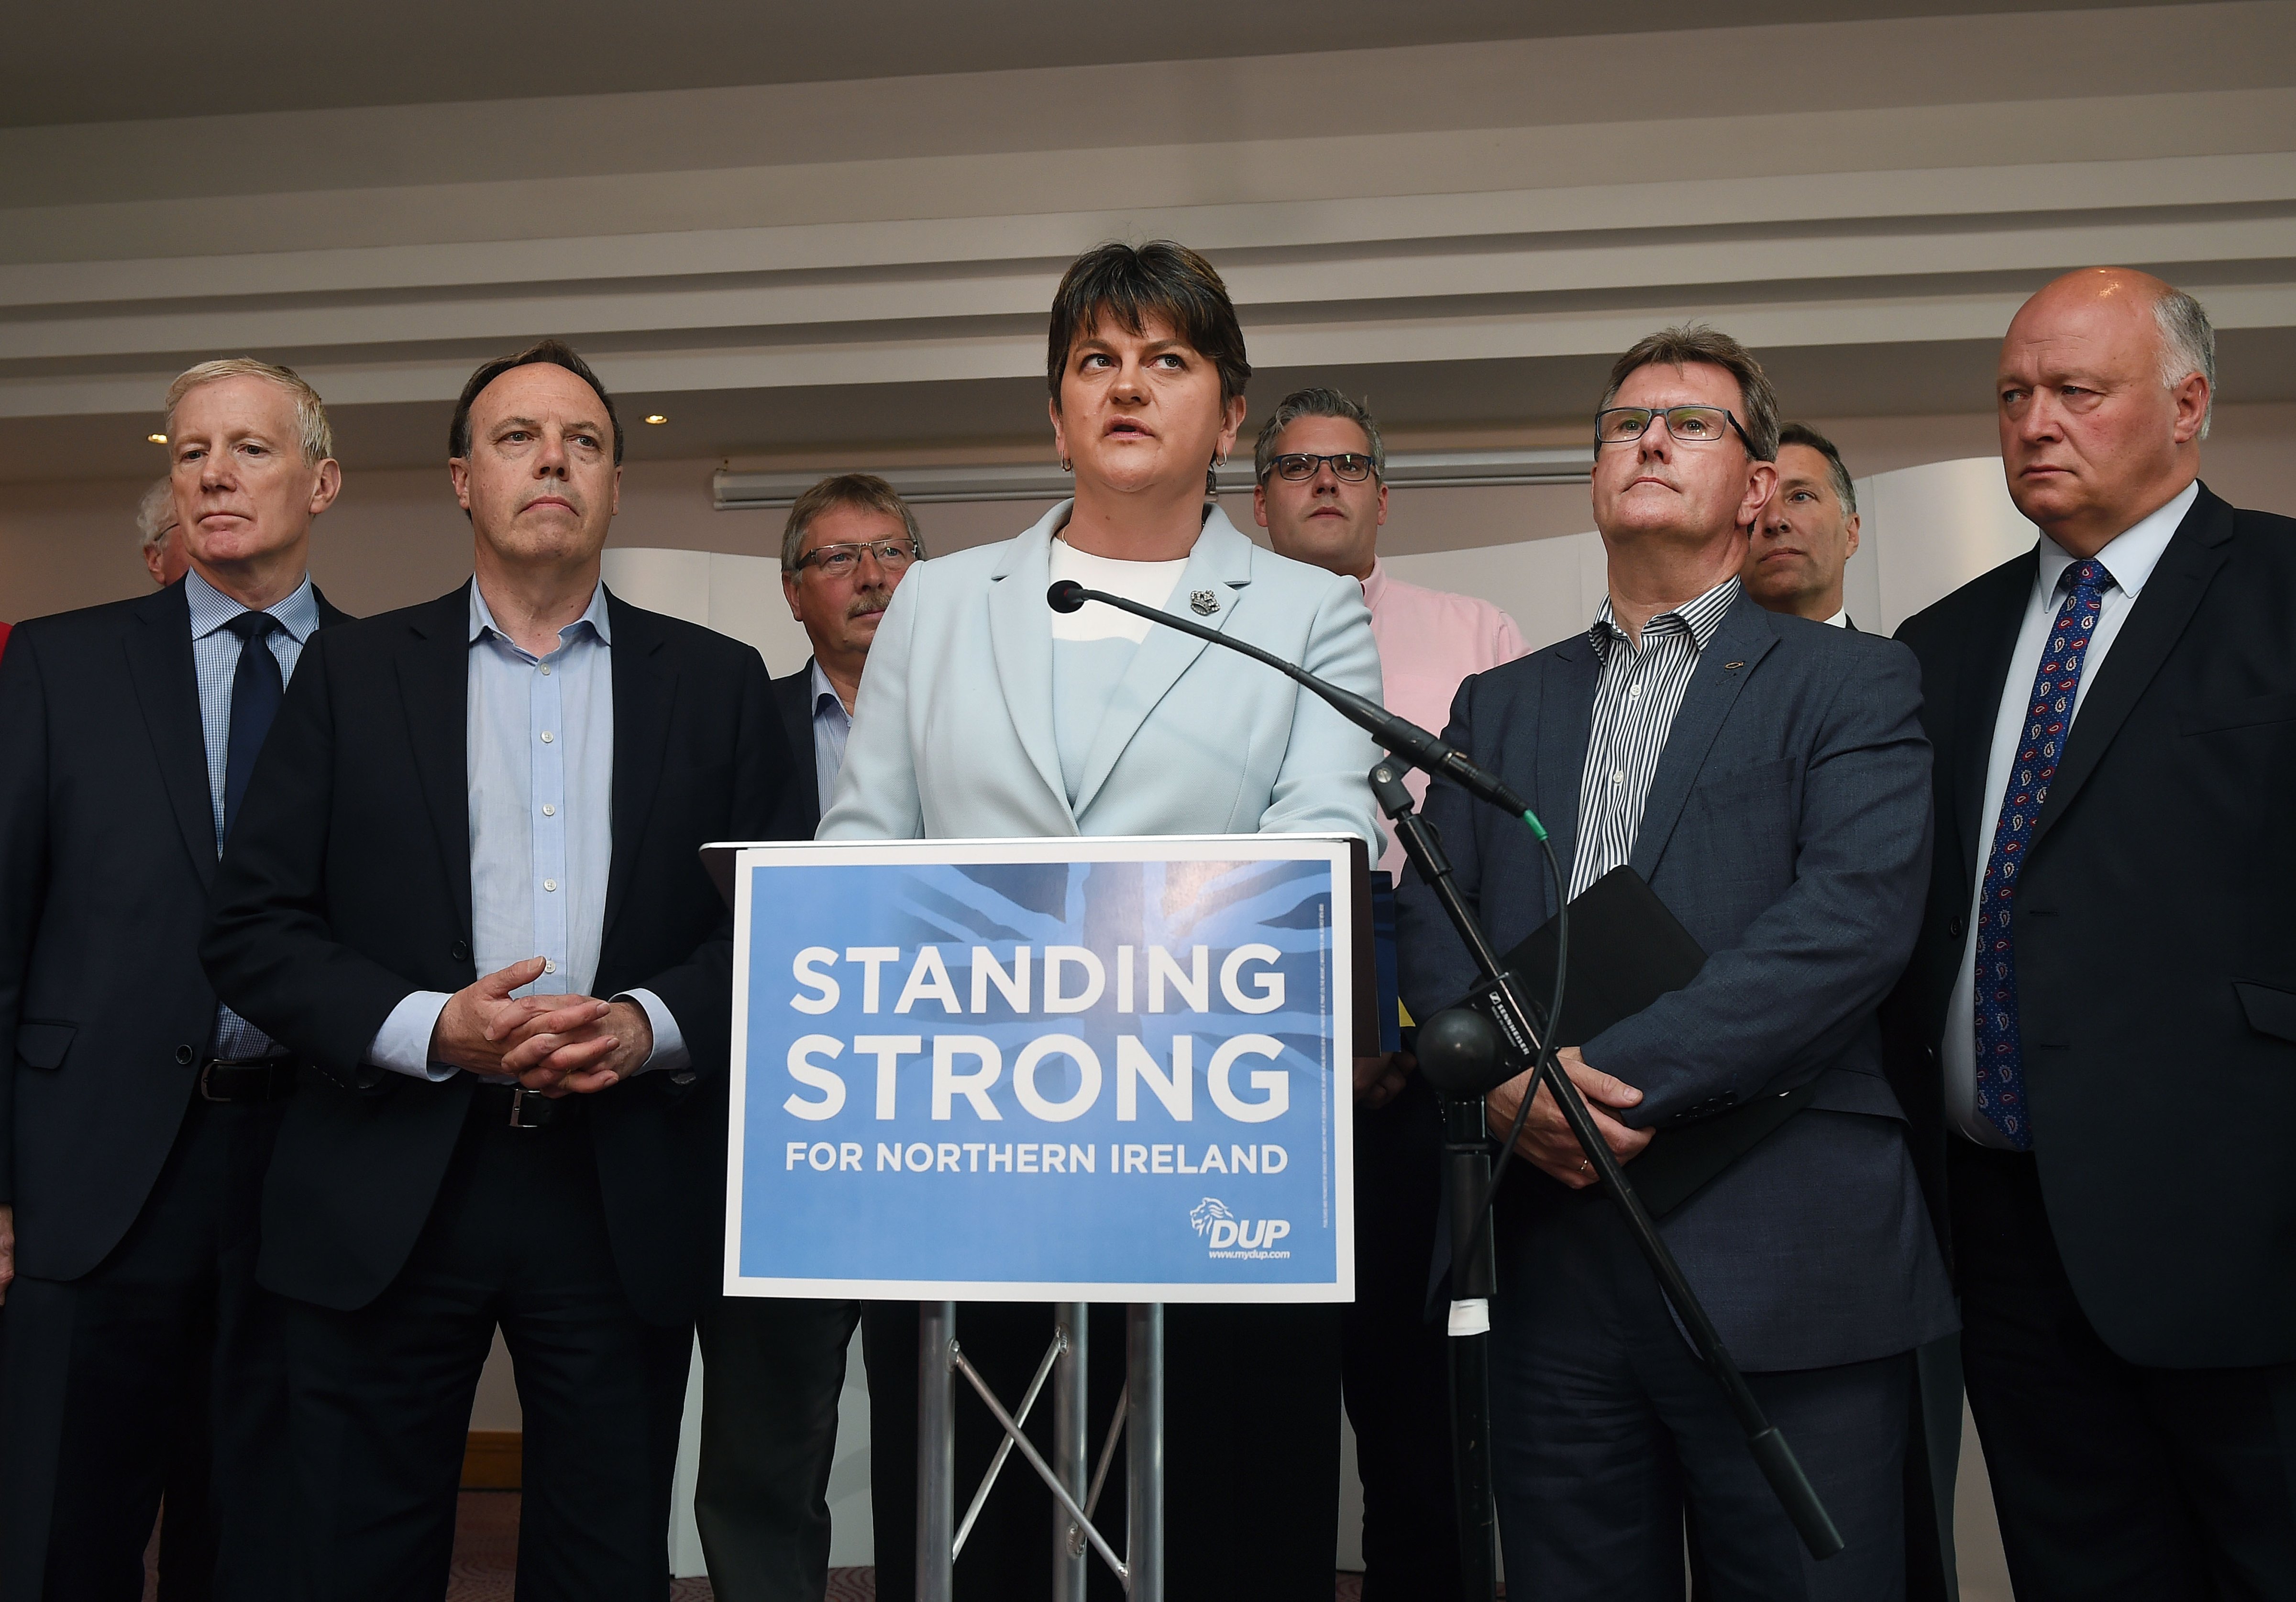 DUP leader and Northern Ireland former First Minister Arlene Foster (C) holds a brief press conference with the DUP's newly elected Westminster candidates who stood in the general election on June 9, 2017 in Belfast, Northern Ireland.